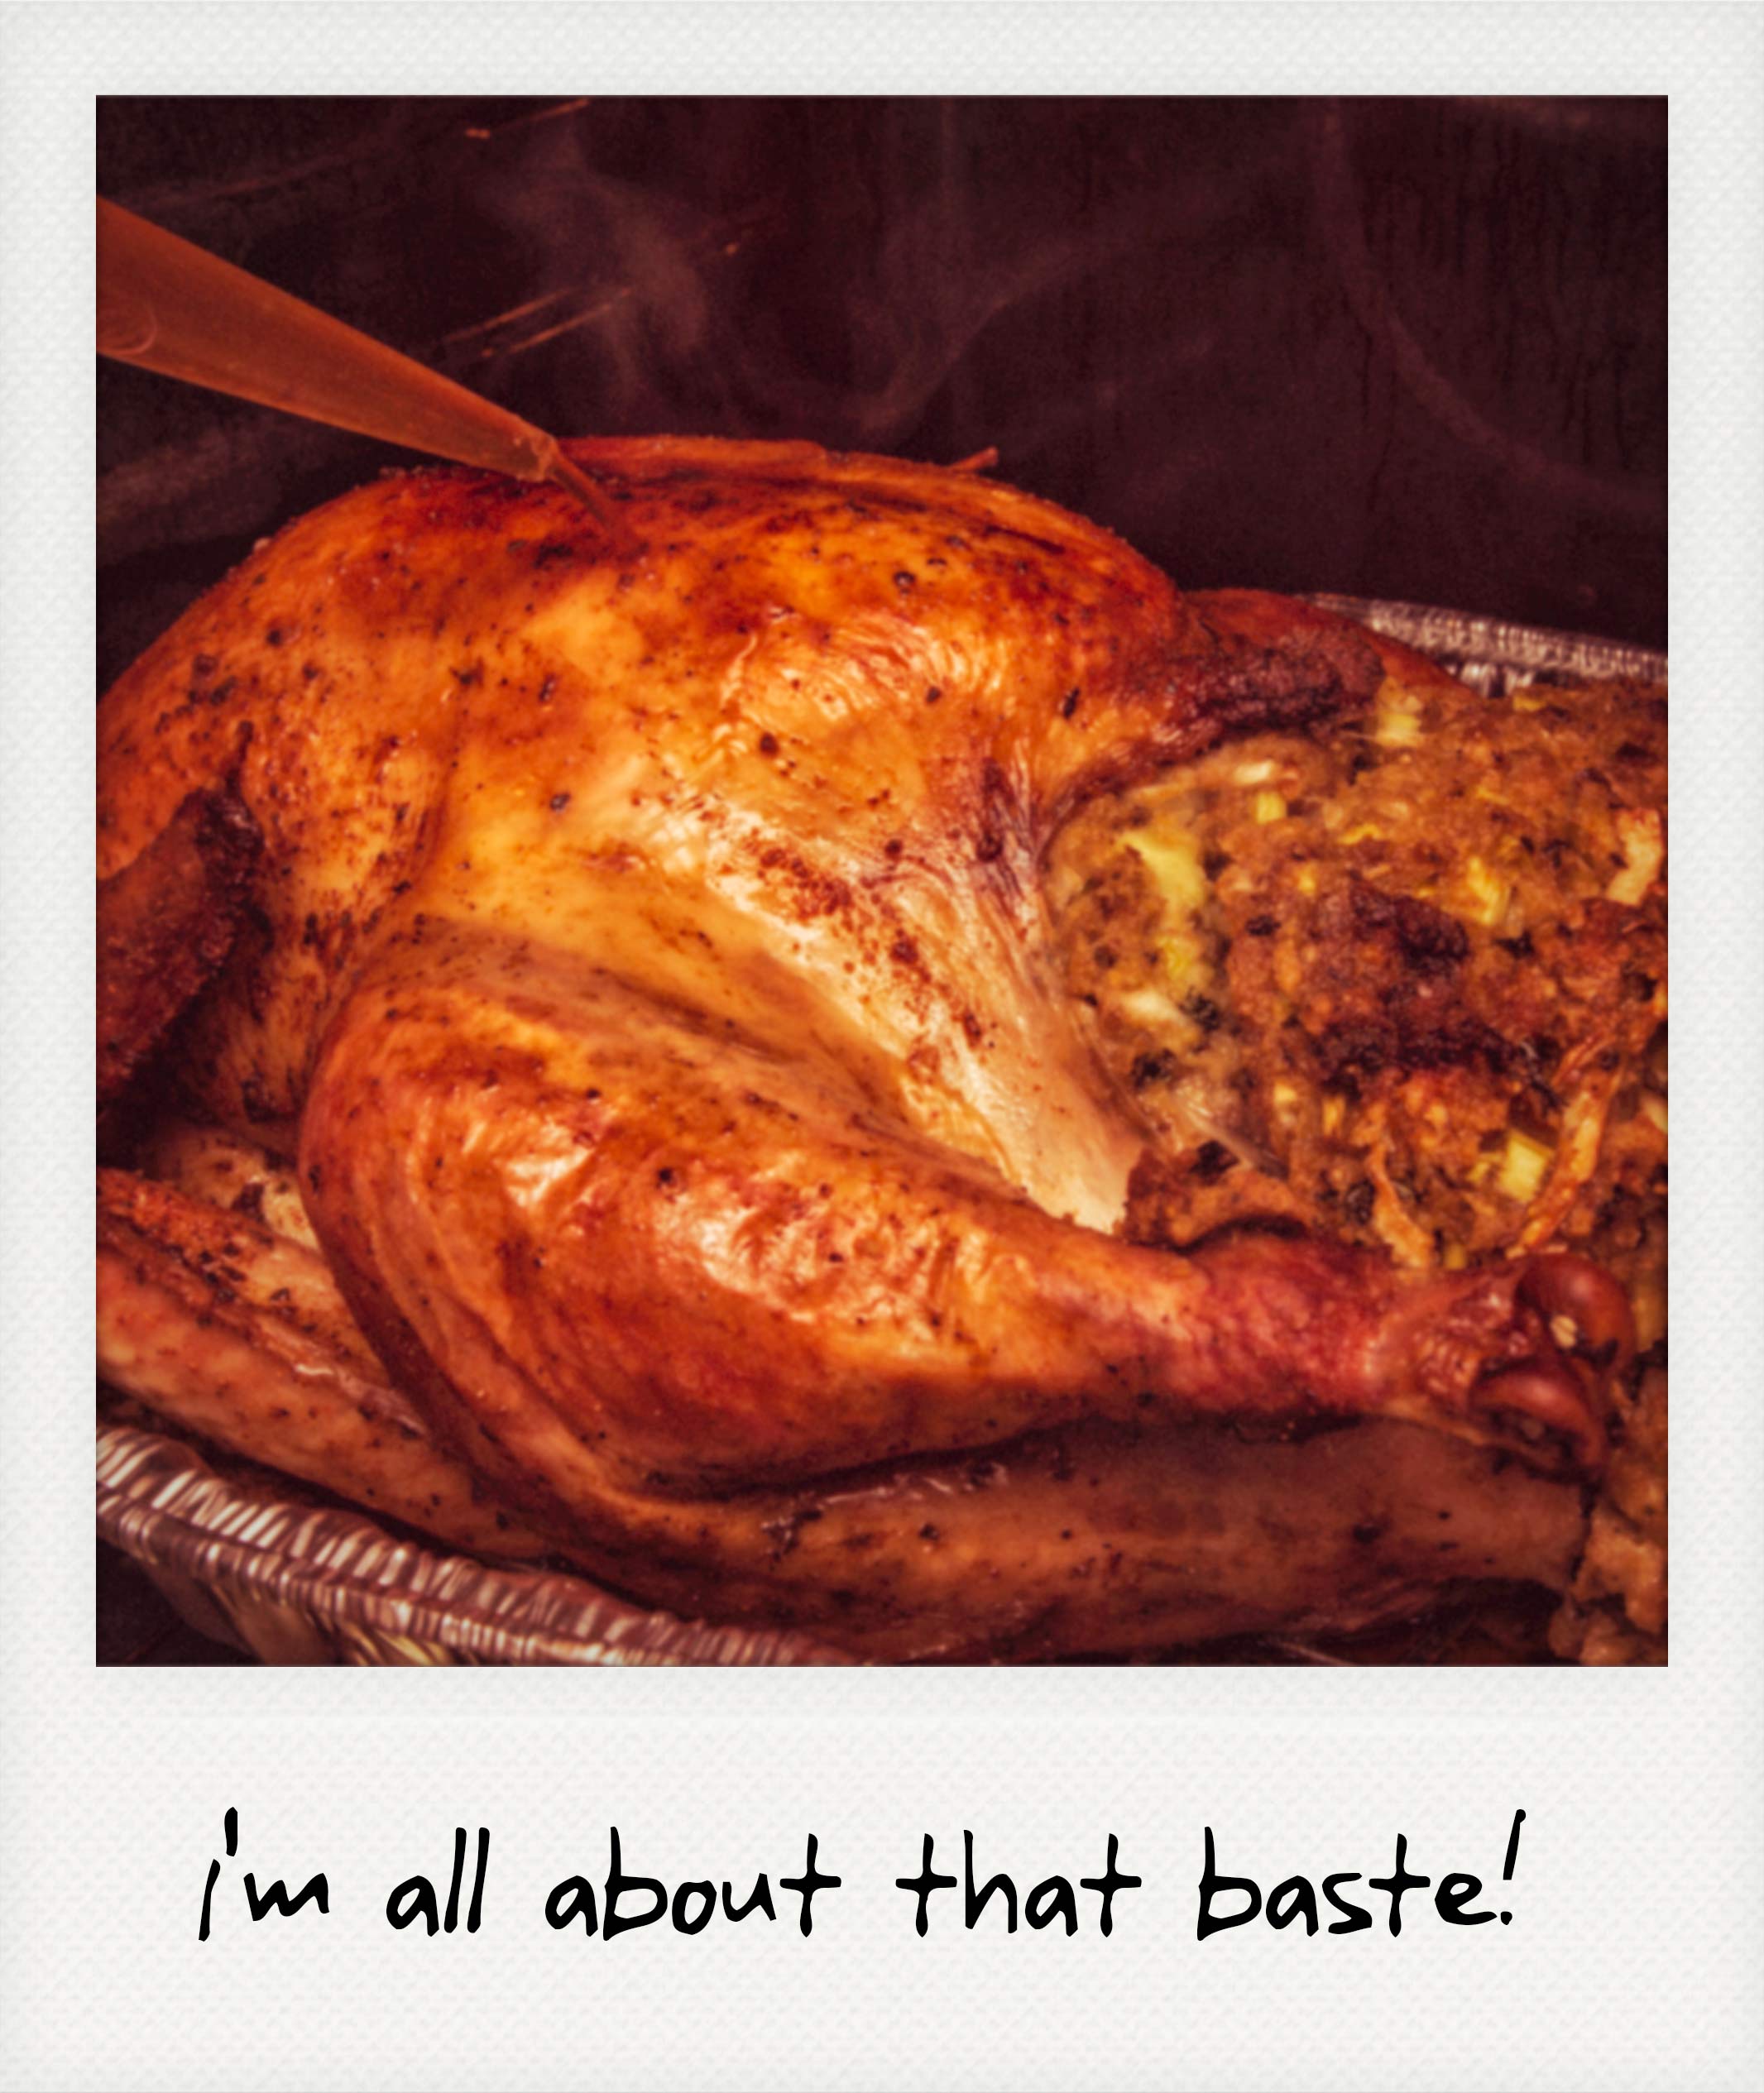 I'm all about that baste!